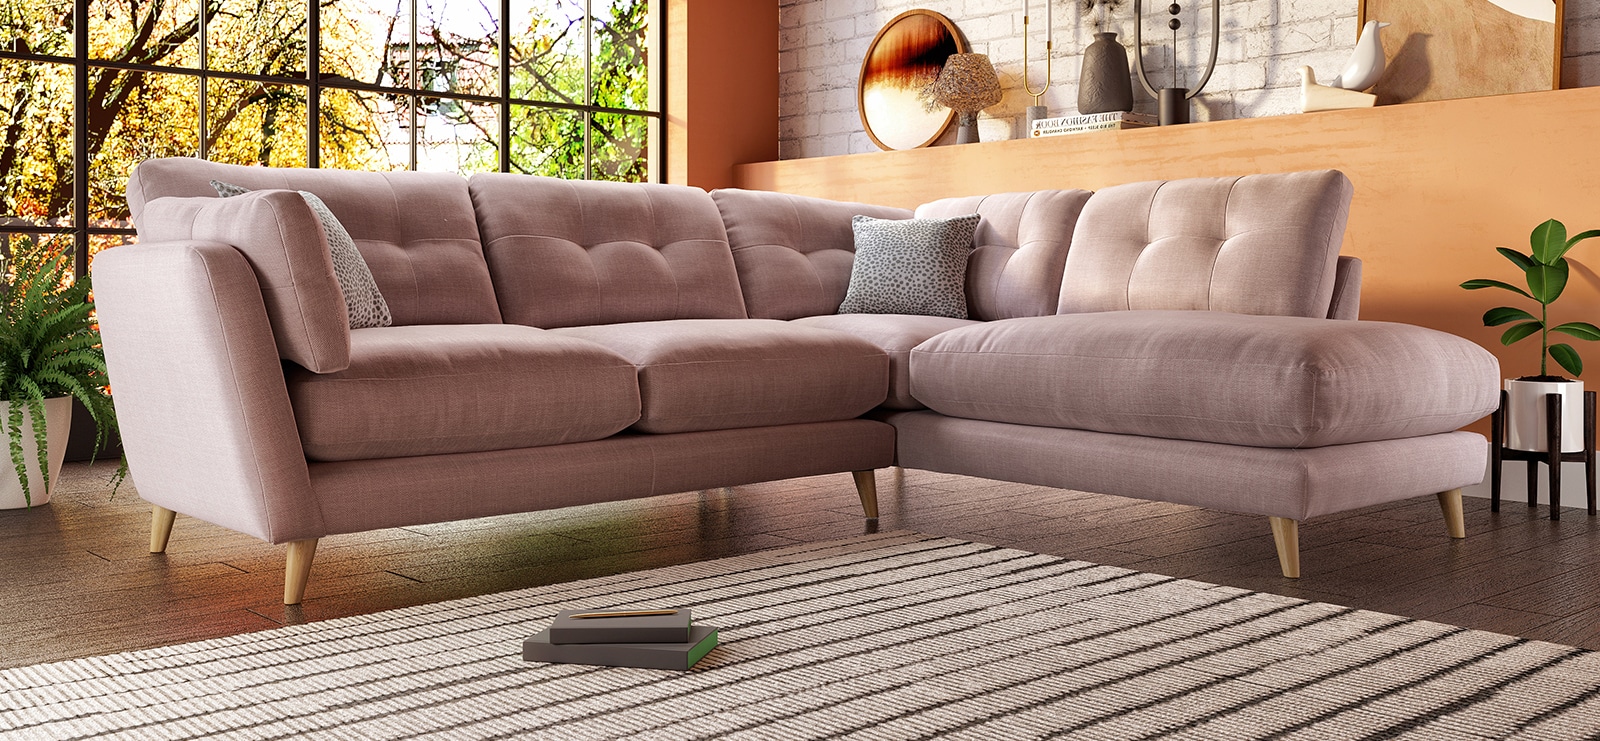 Which Brands Offer Eco-Friendly and Sustainable Couch Options?